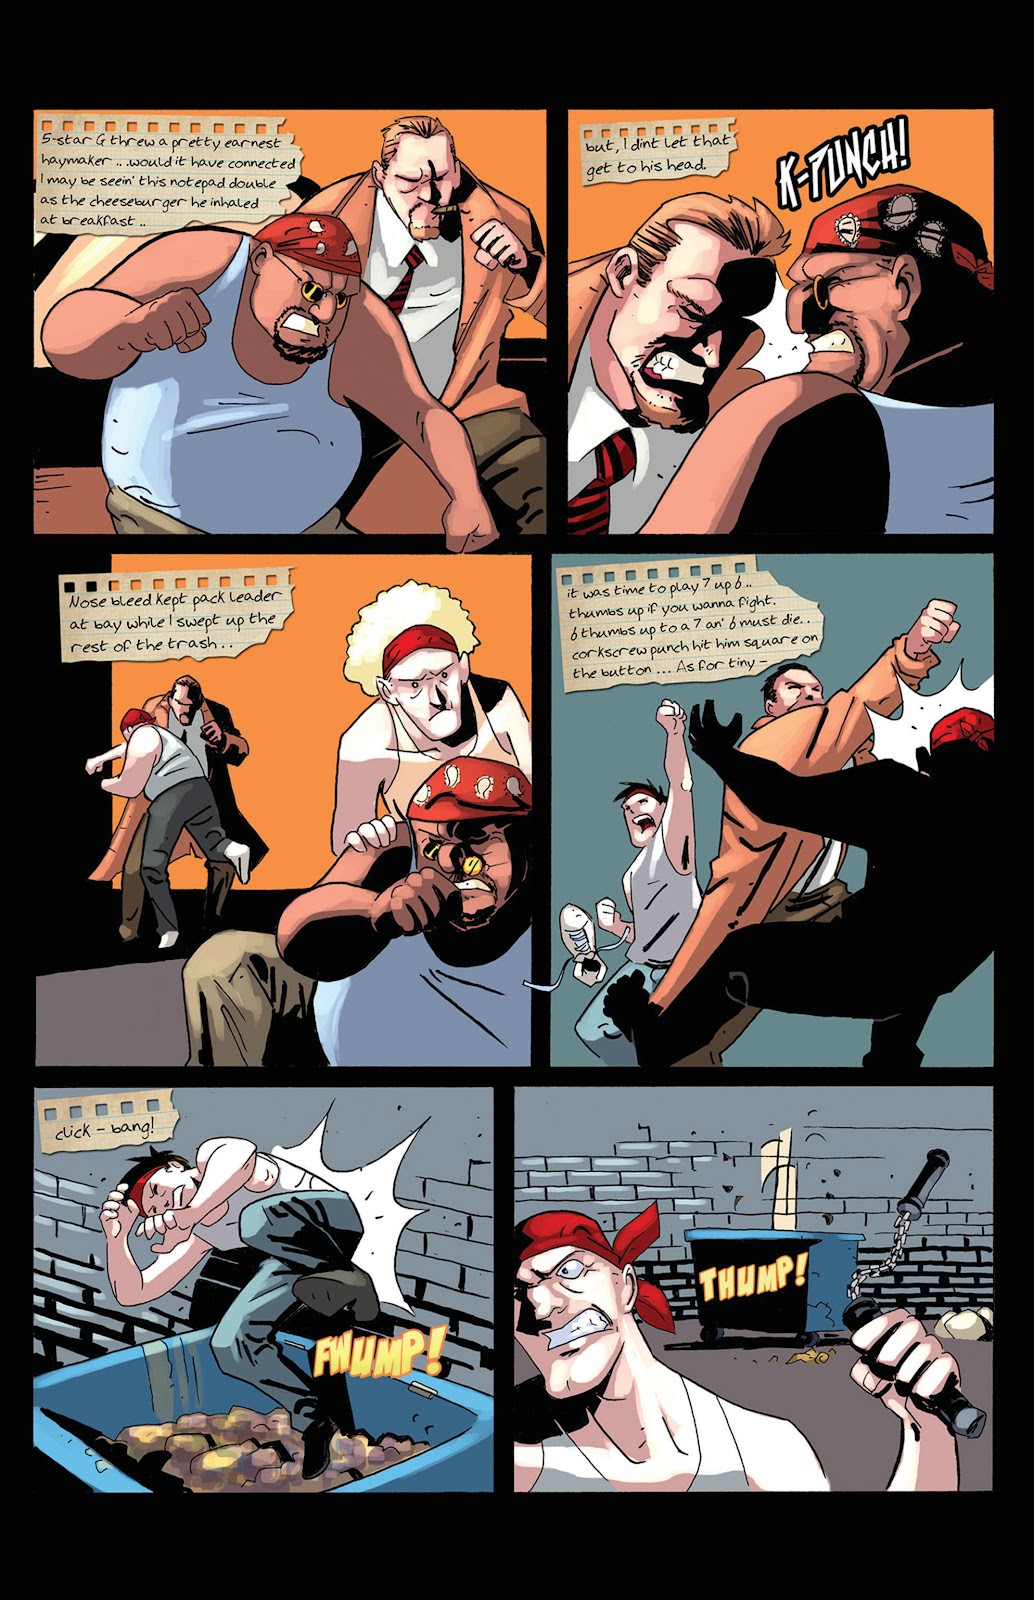 Strong Box: The Big Bad Book of Boon issue 1 - Page 6